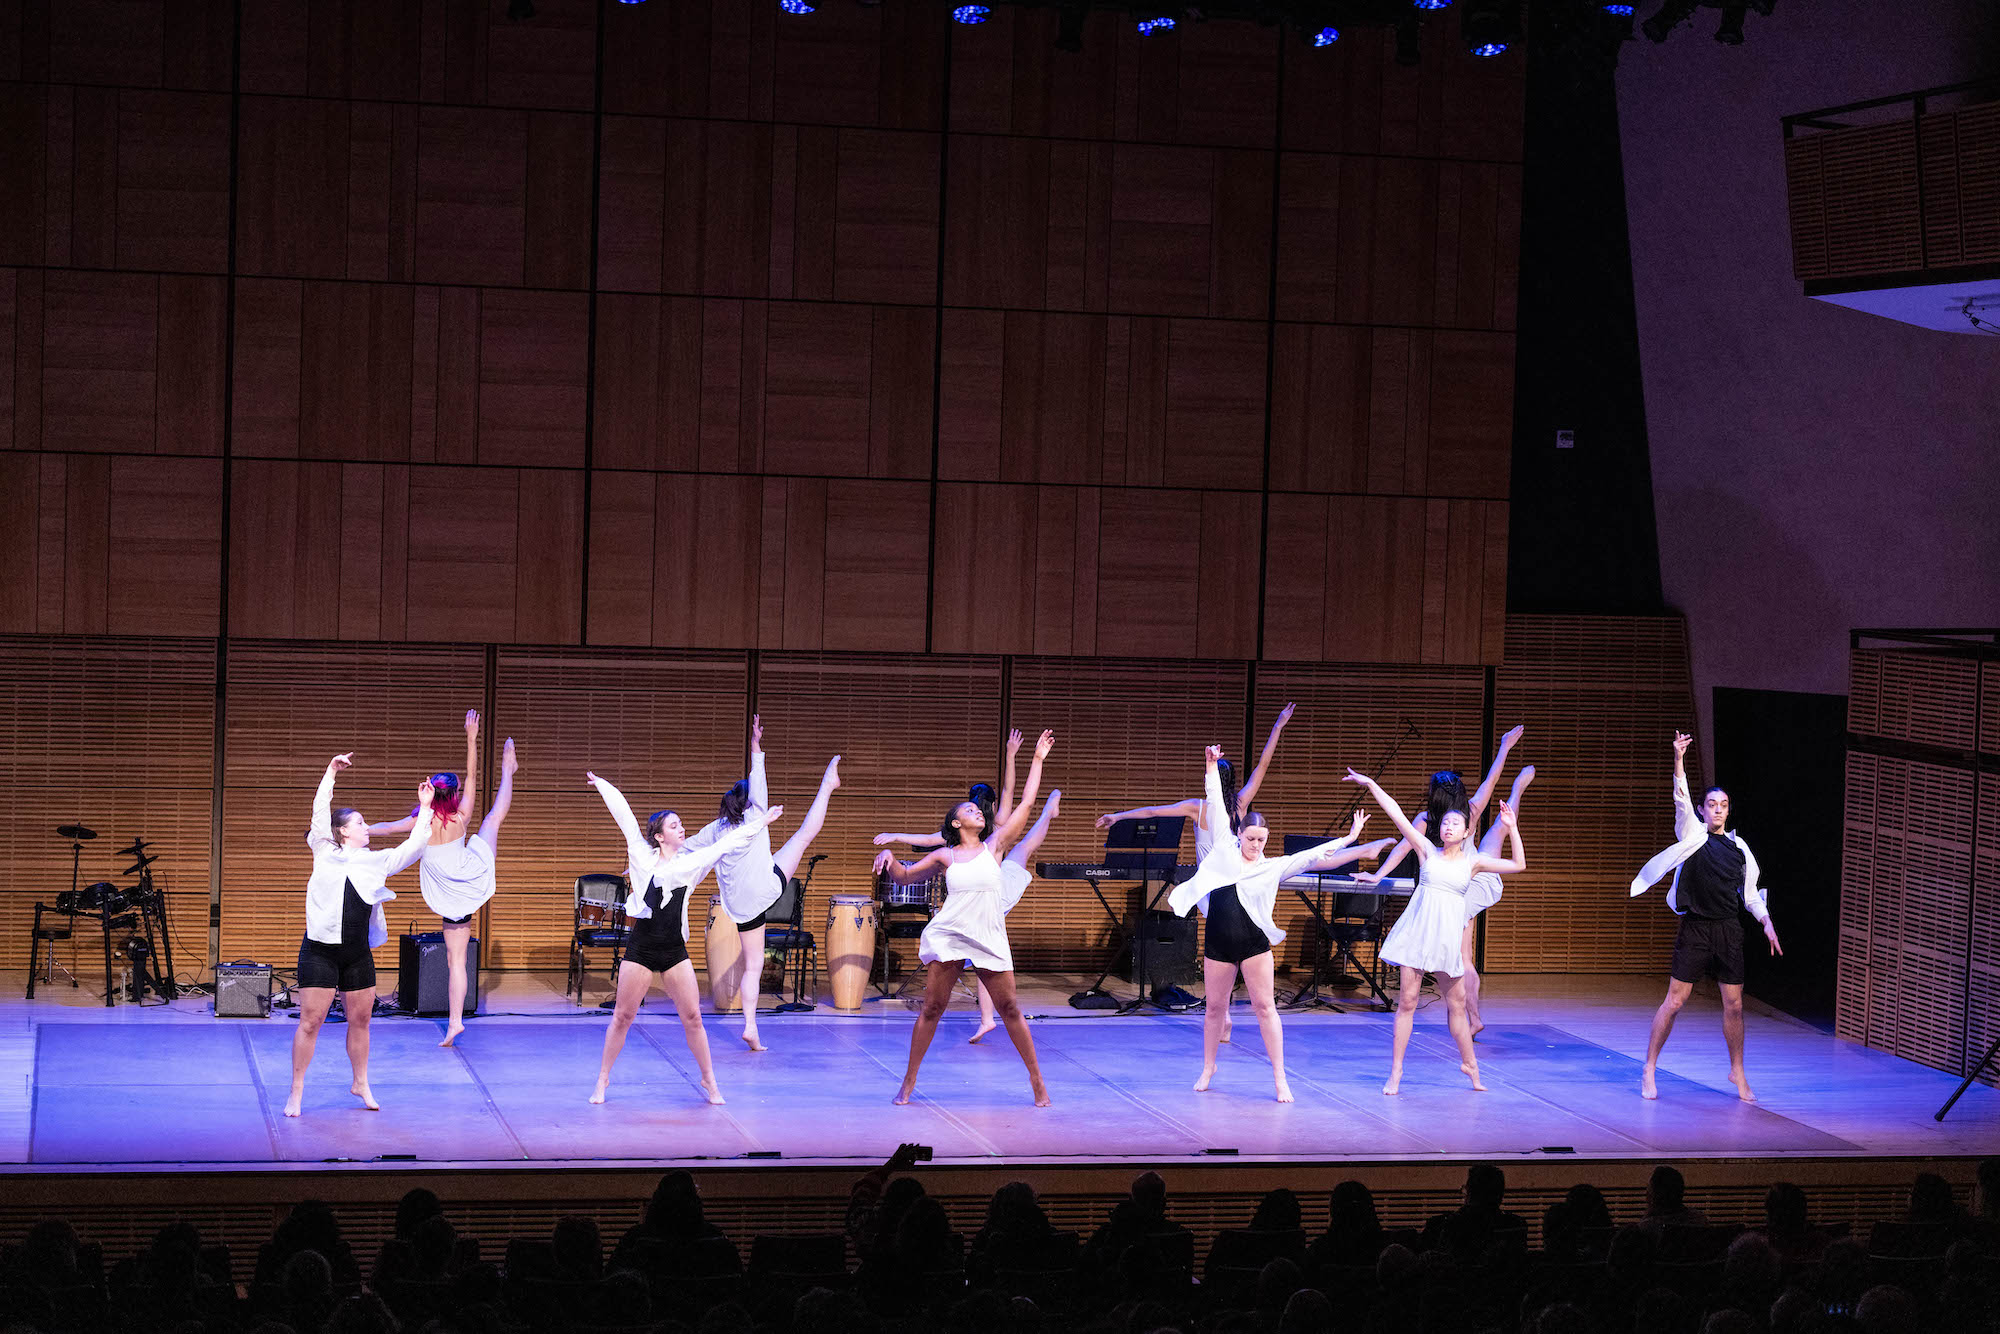 Penn Dance Company performing on stage at Carnegie Hall.